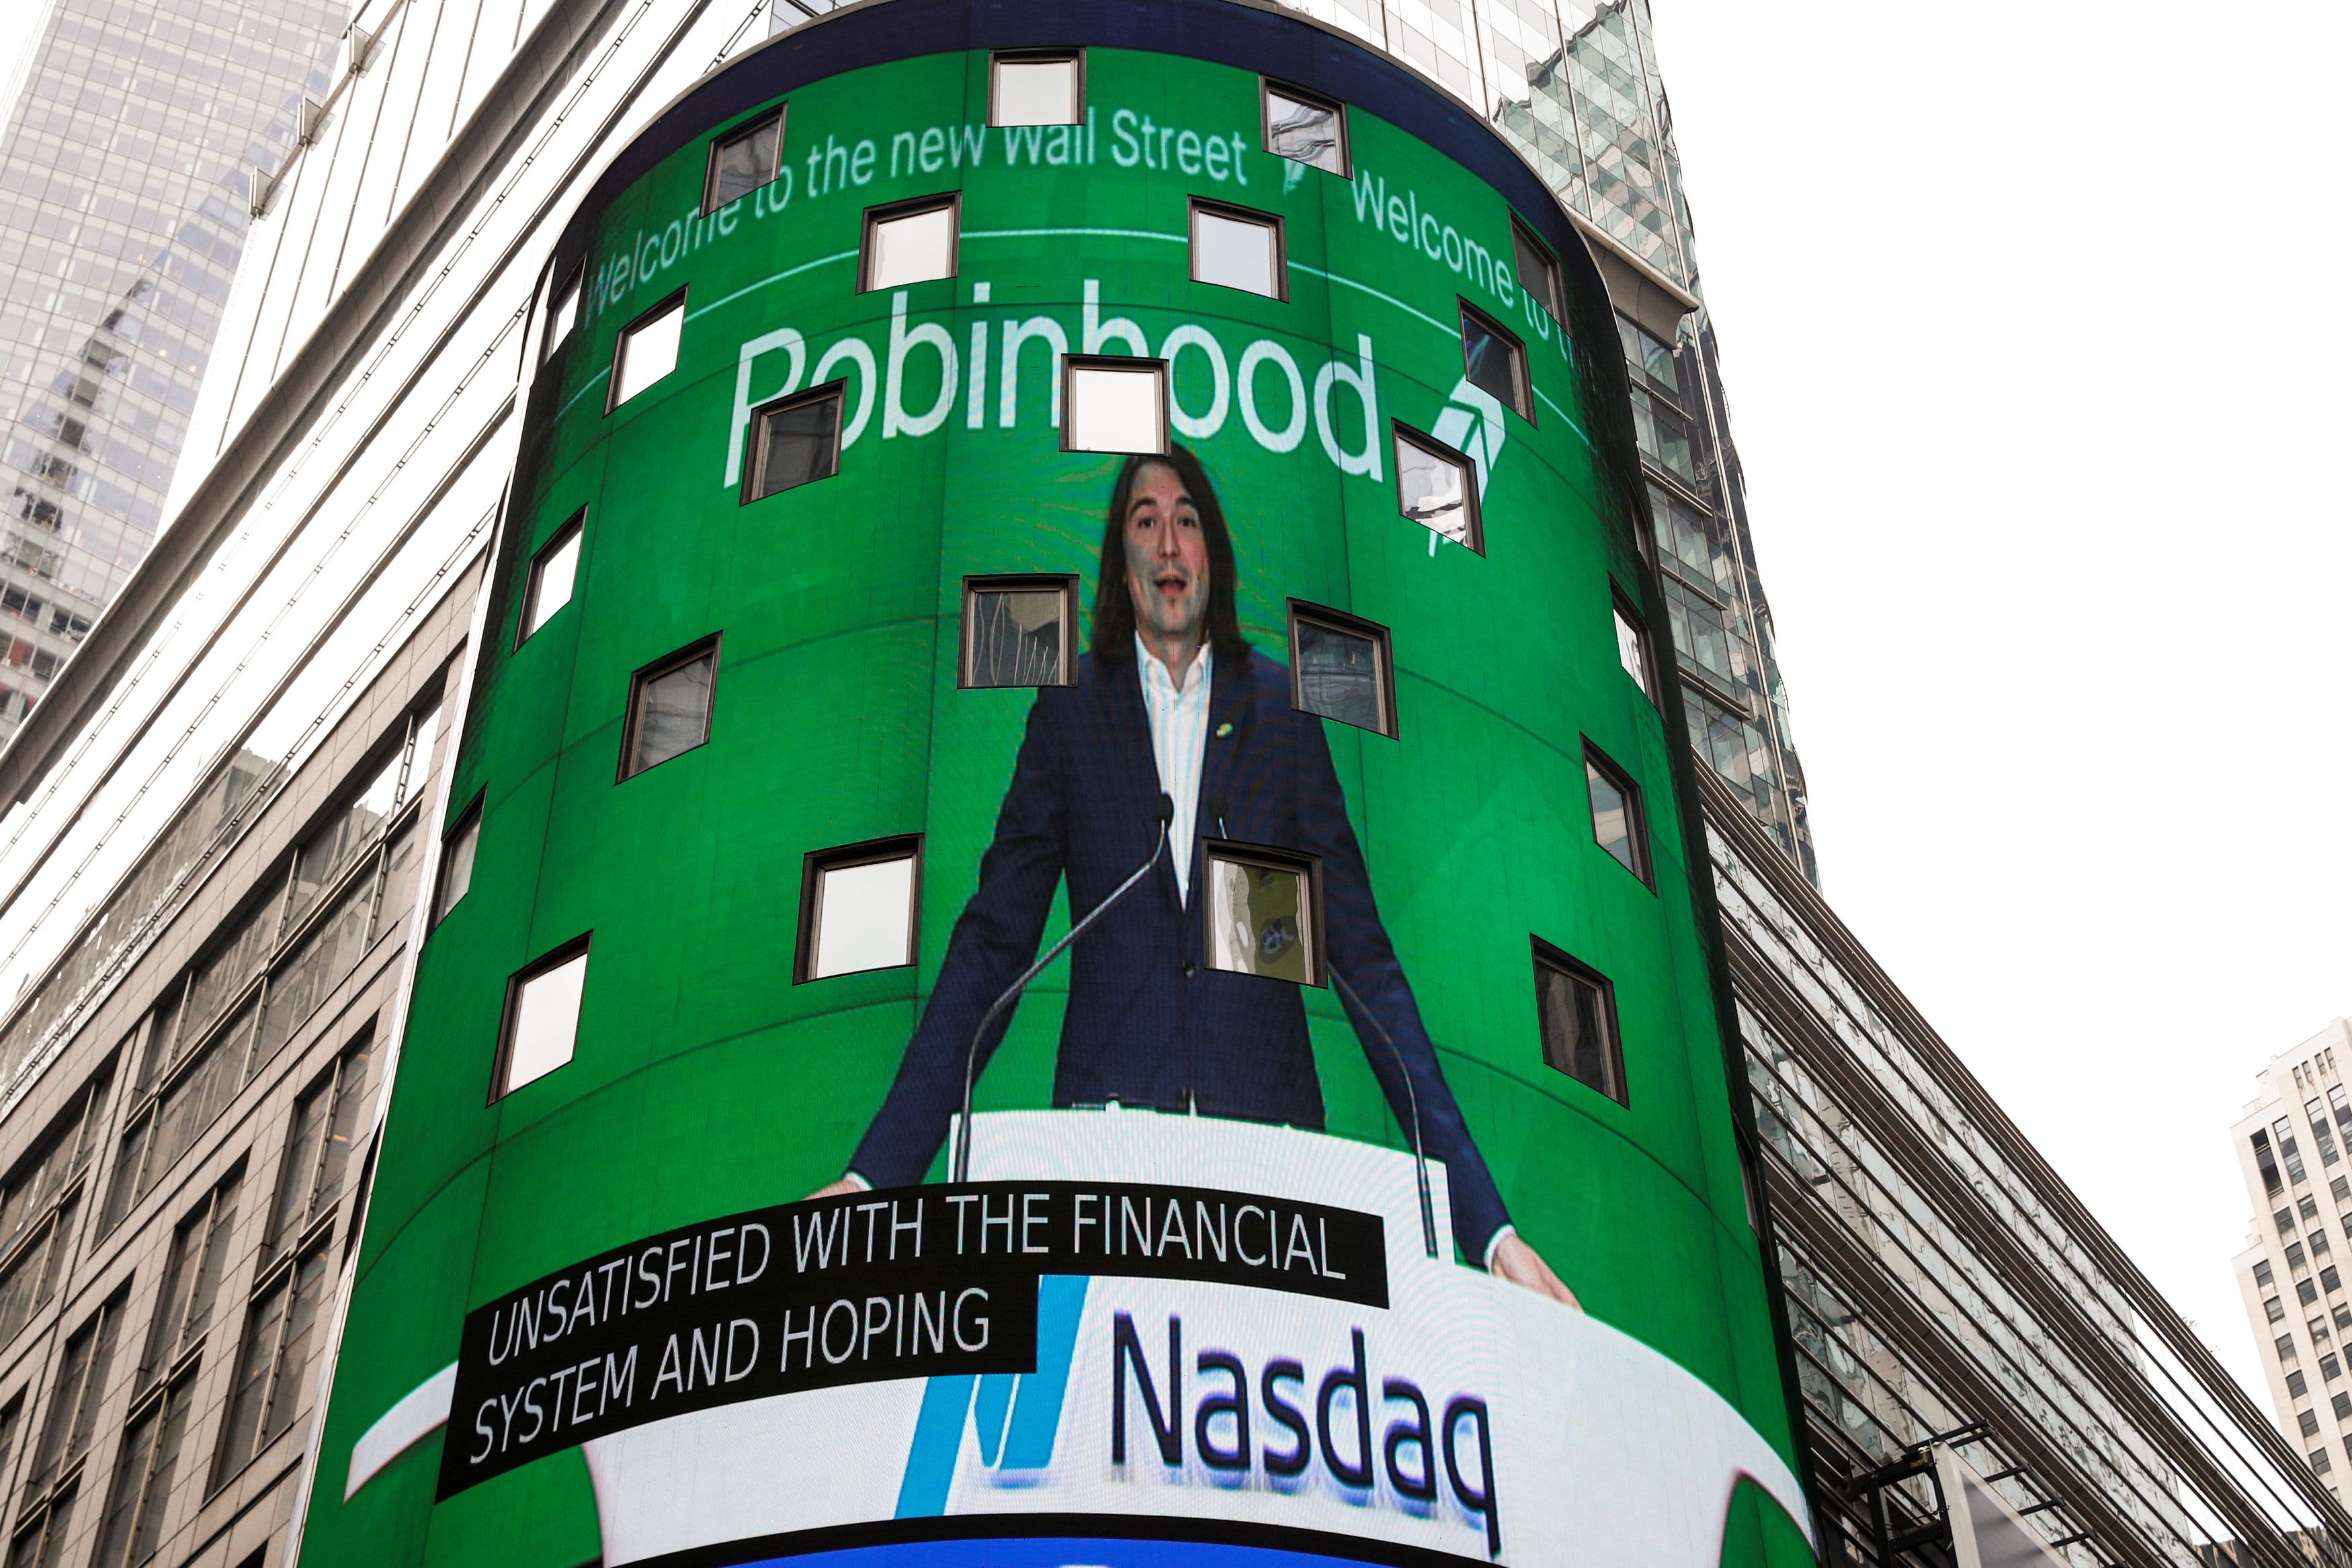 Robinhood releases its first earnings report as a public company on Wednesday. Here’s what investors need to know